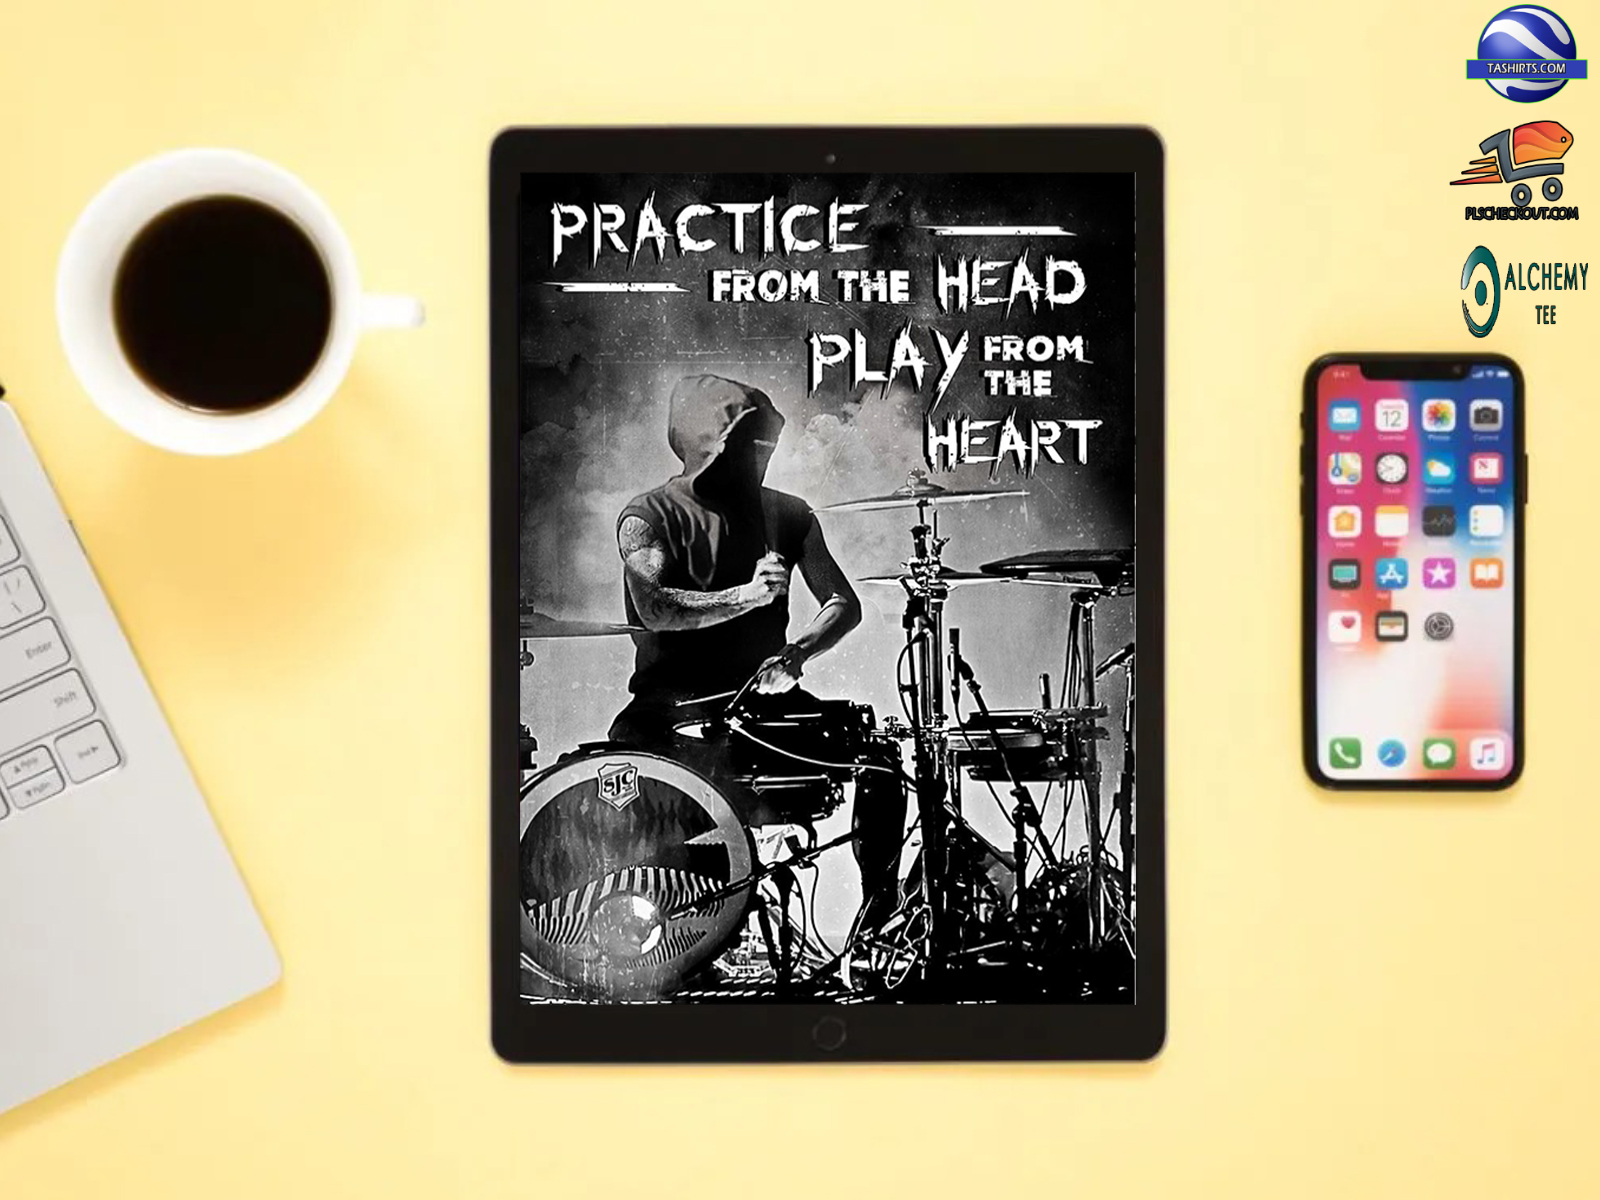 Drum Practice from the head play from the heart poster